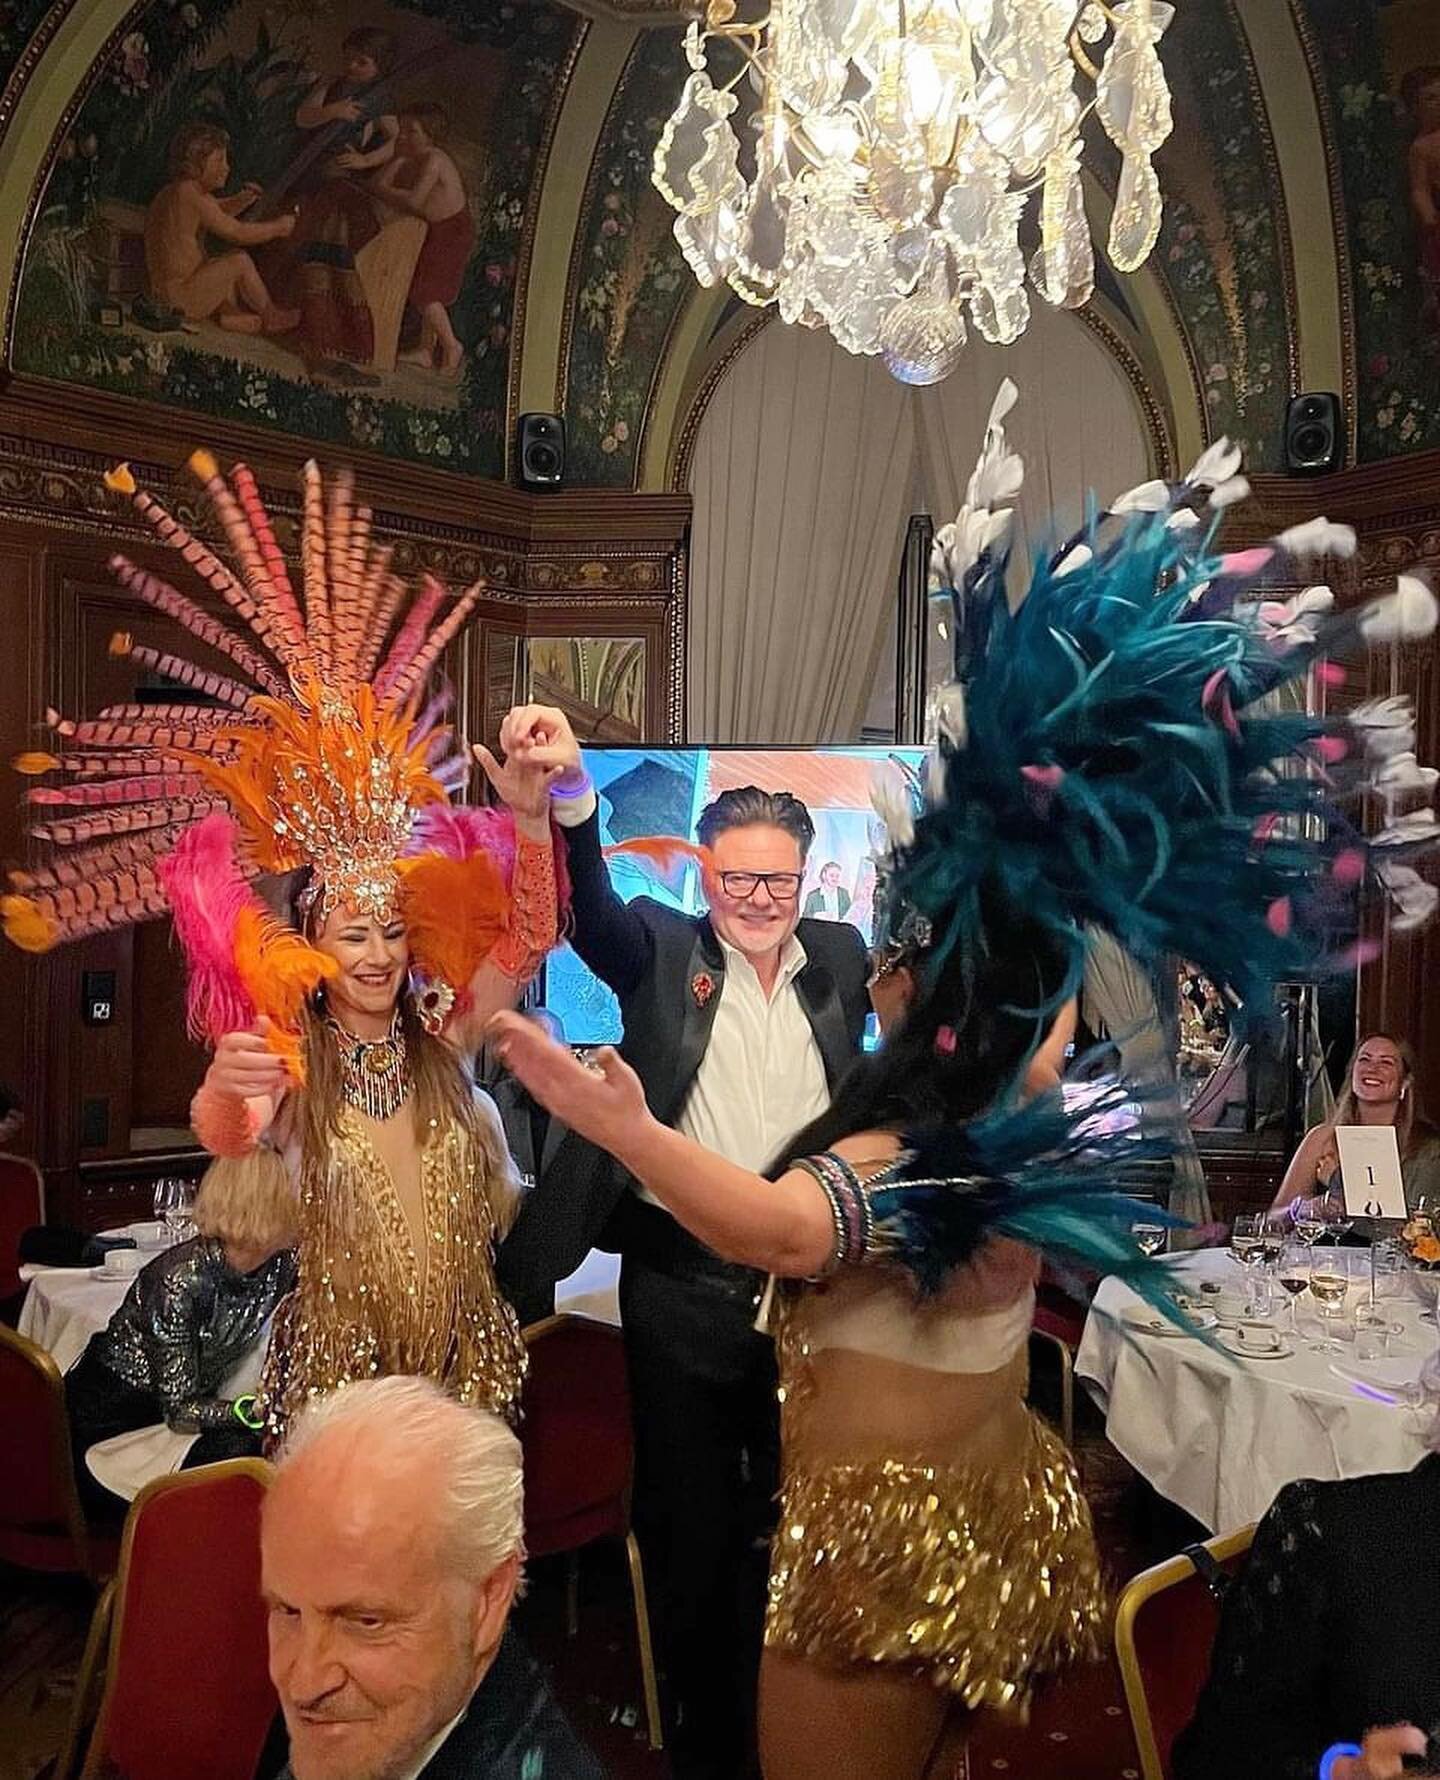 When Samba meets elegance at @grandhotelstockholm , you know it&rsquo;s a 60th Birthday party like no other!✨

Thank you @samsum_73 for an amazing party!

#sambadancers #sambadansare #grandhotelstockholm #stockholmcity #brasiliansamba